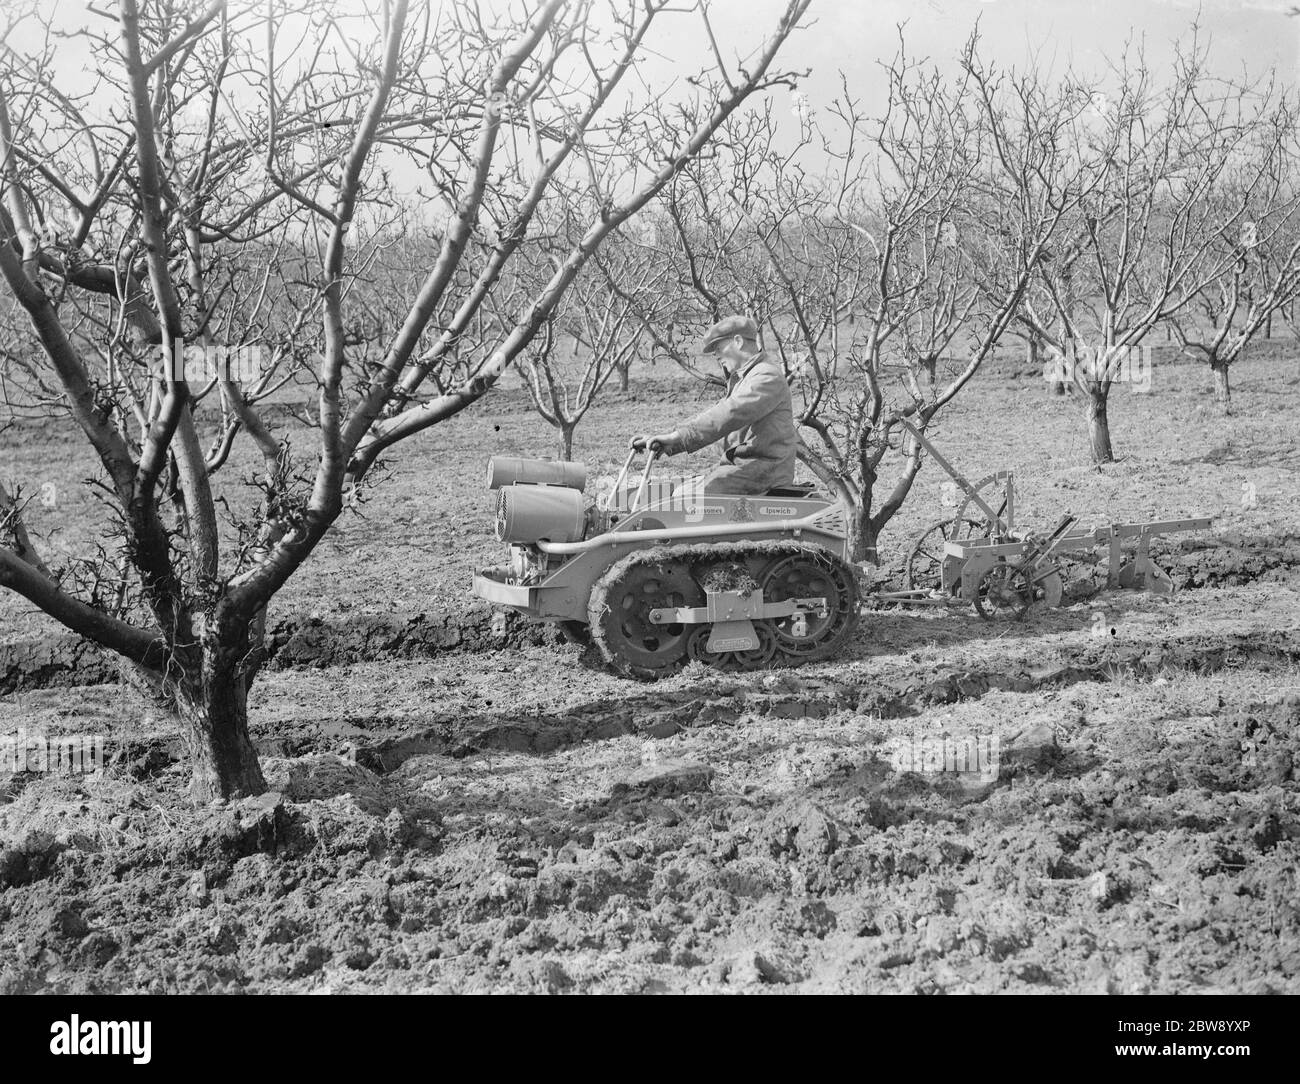 The Ransomes from Ipswich demonstrate their MG2 Motor Garden Cultivator in East Malling , Kent . 22 March 1939. Stock Photo